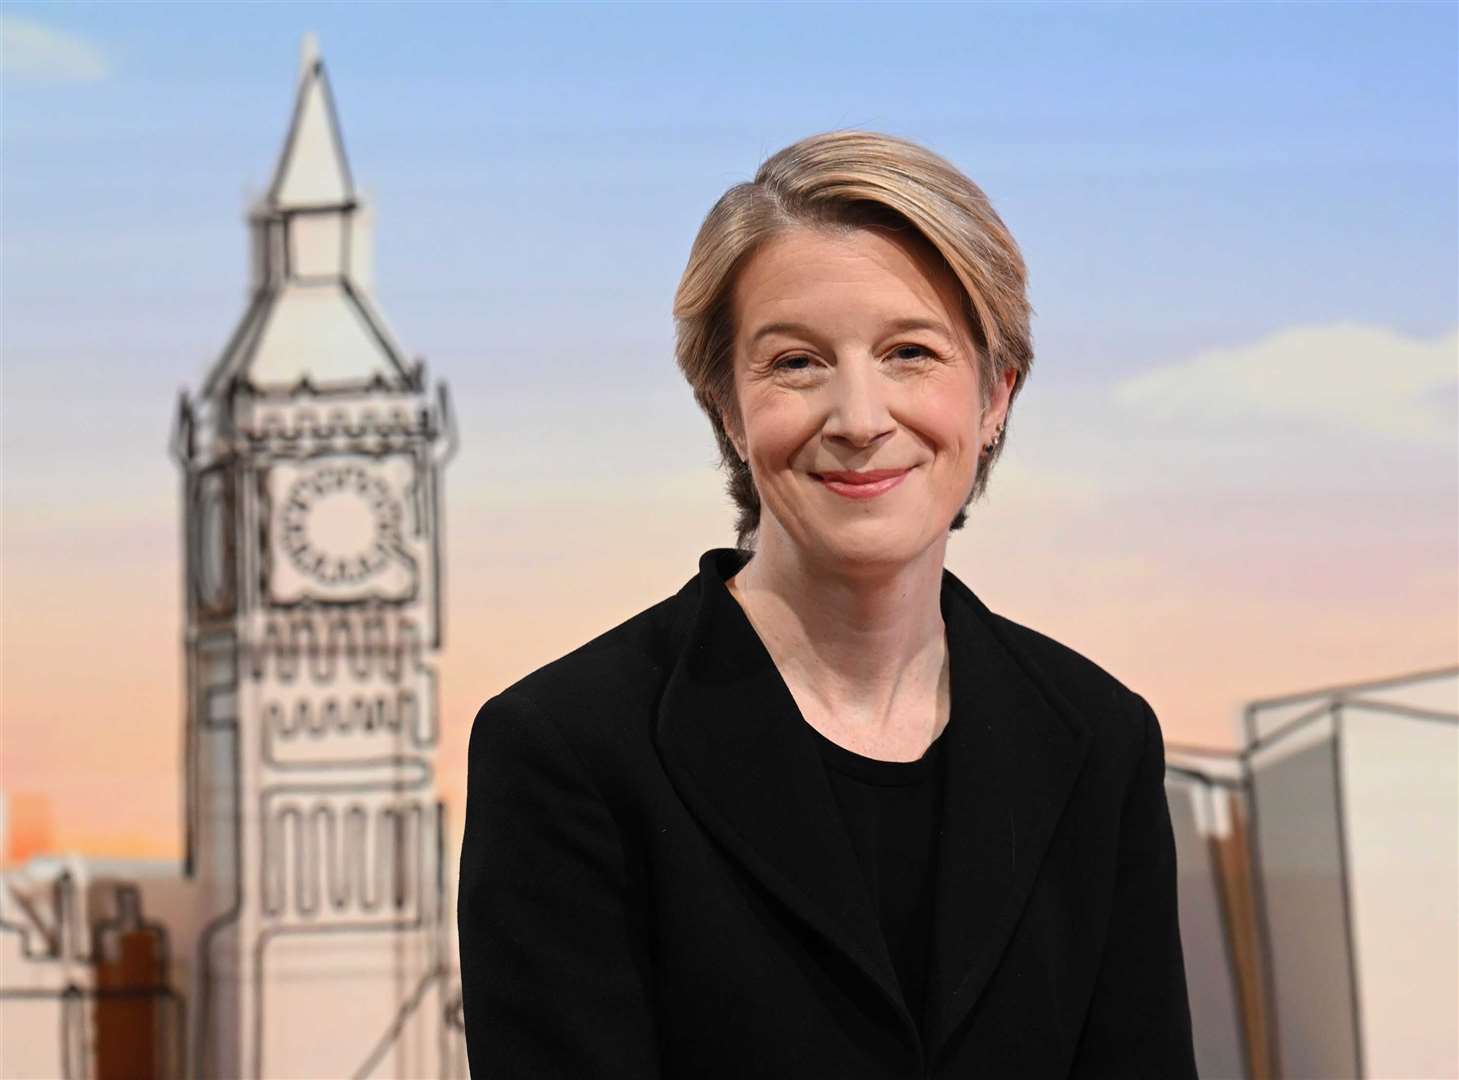 NHS England chief executive Amanda Pritchard told BBC’s Sunday With Laura Kuenssberg that kids are seeing messages ‘every day’ that gambling is ‘OK’ (Jeff Overs/BBC/PA)